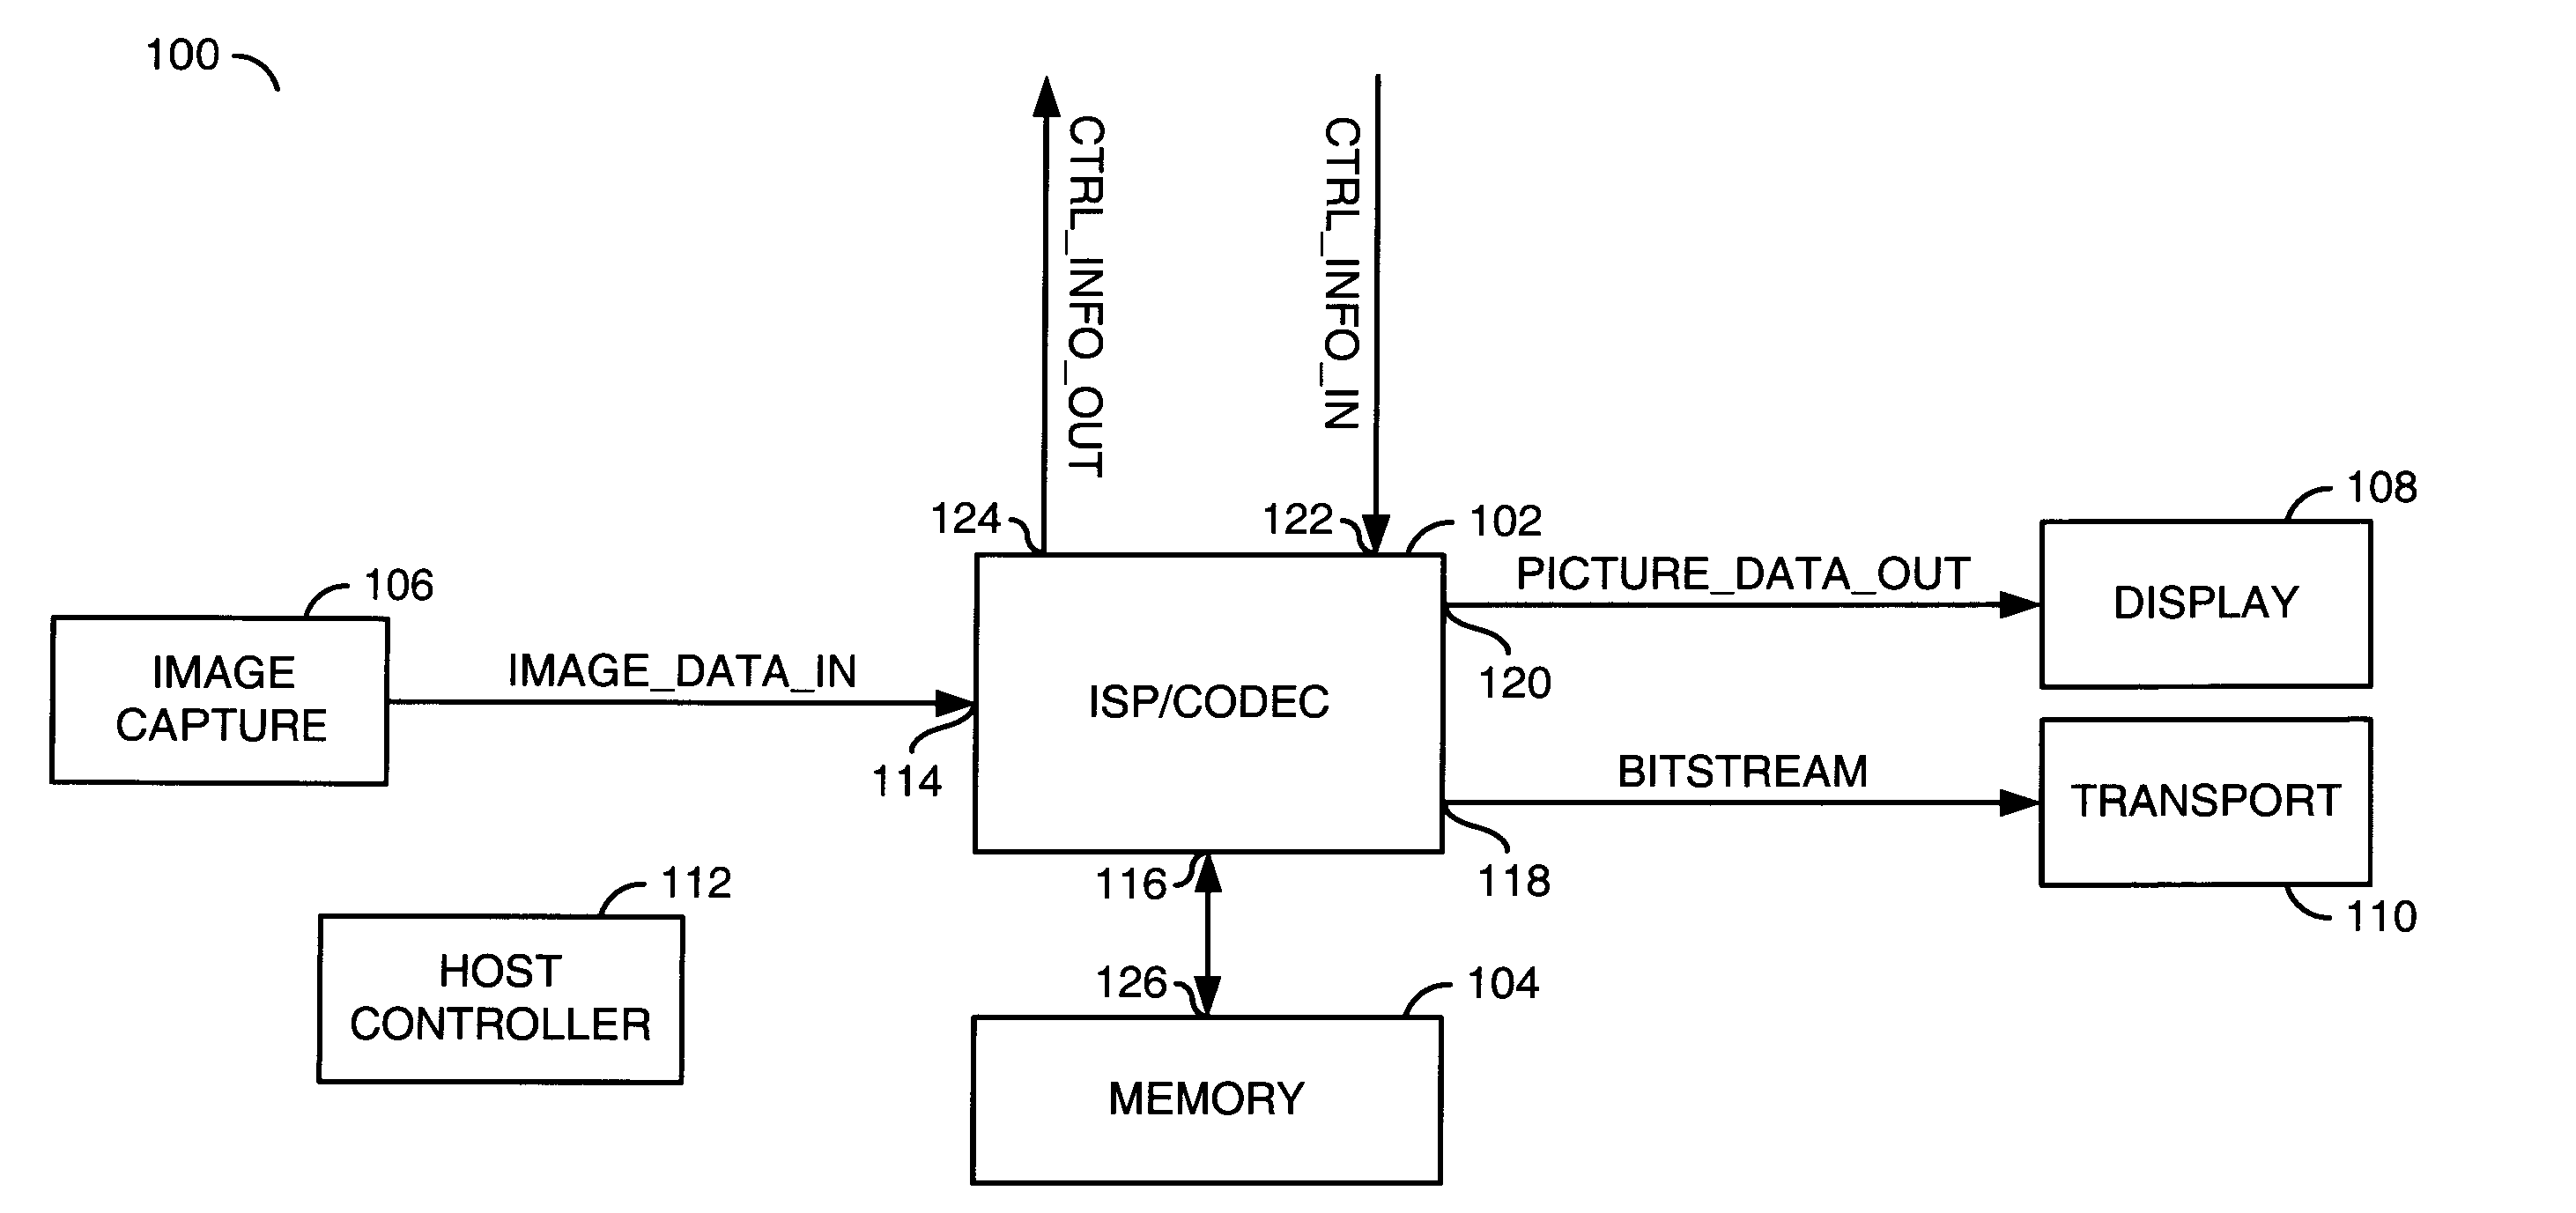 Method and/or architecture for motion estimation using integrated information from camera ISP